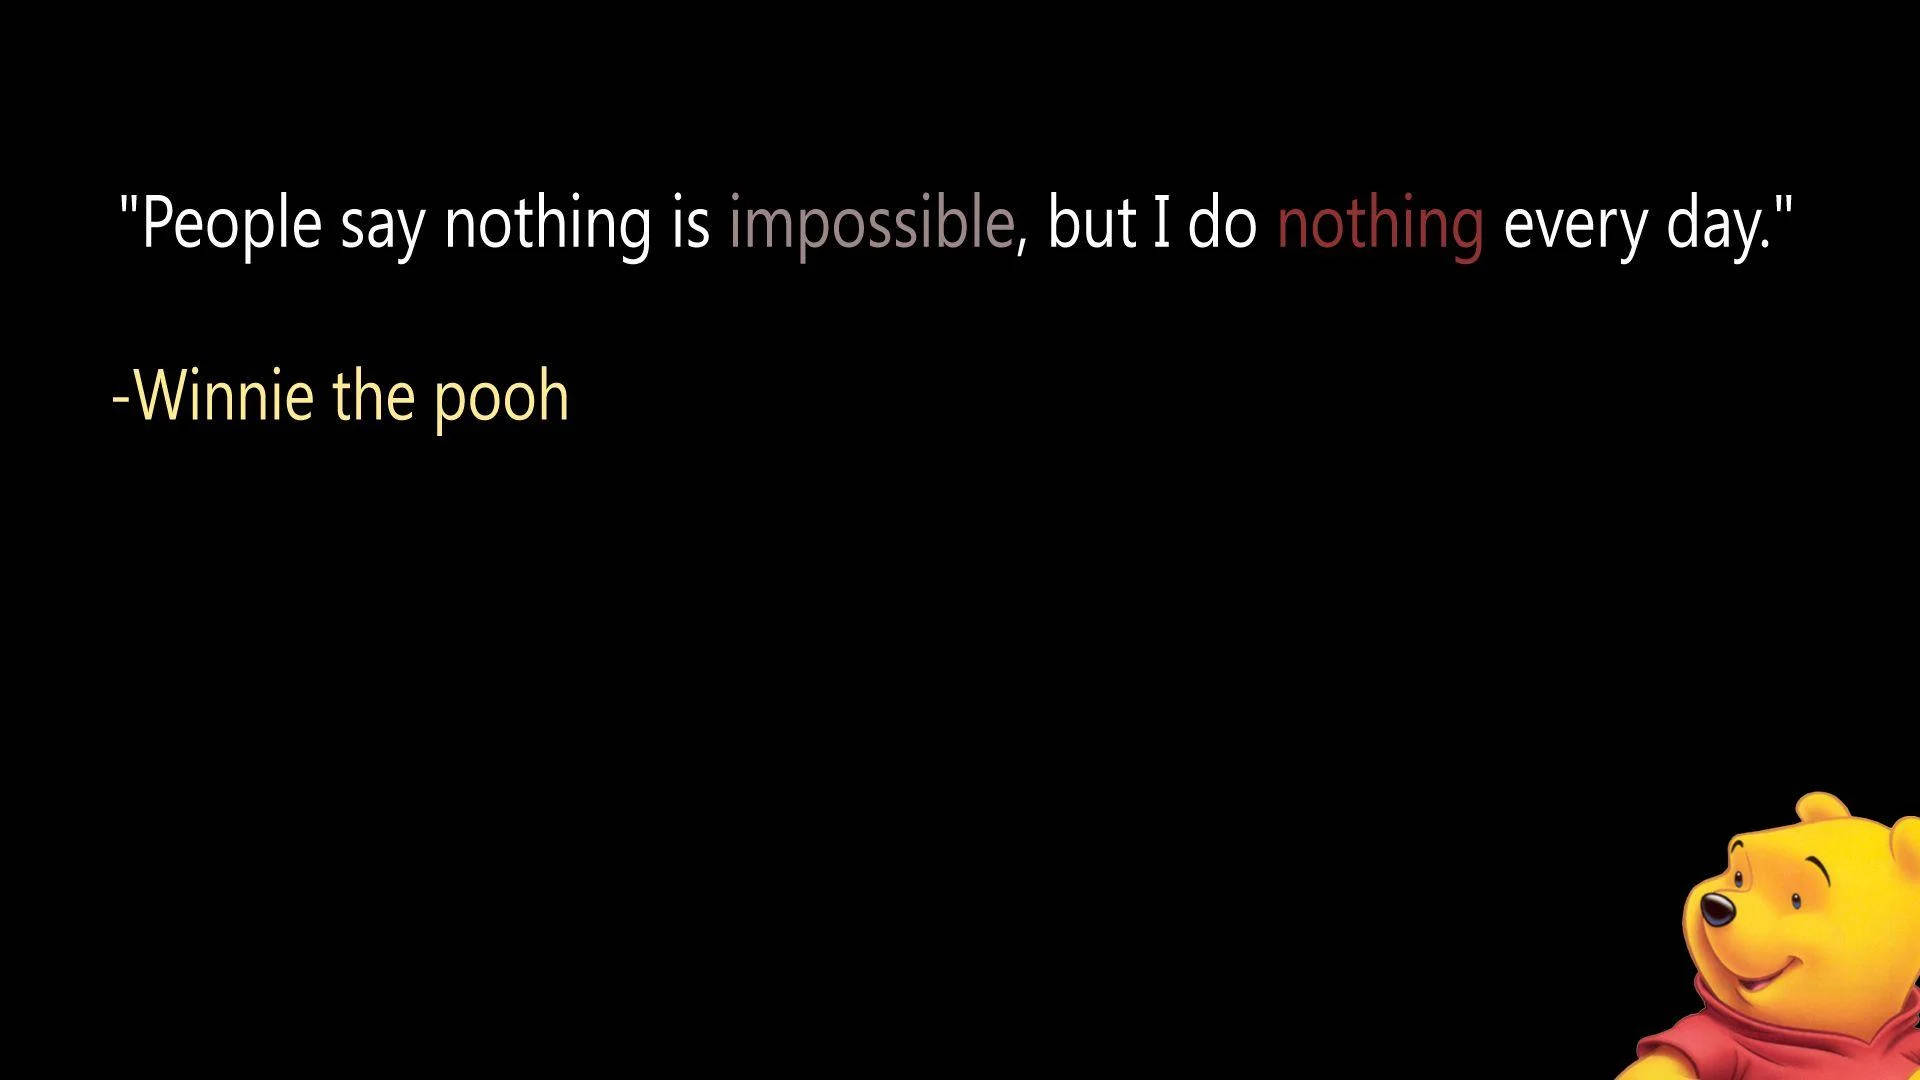 Winnie The Pooh Quotes In Black Wallpaper